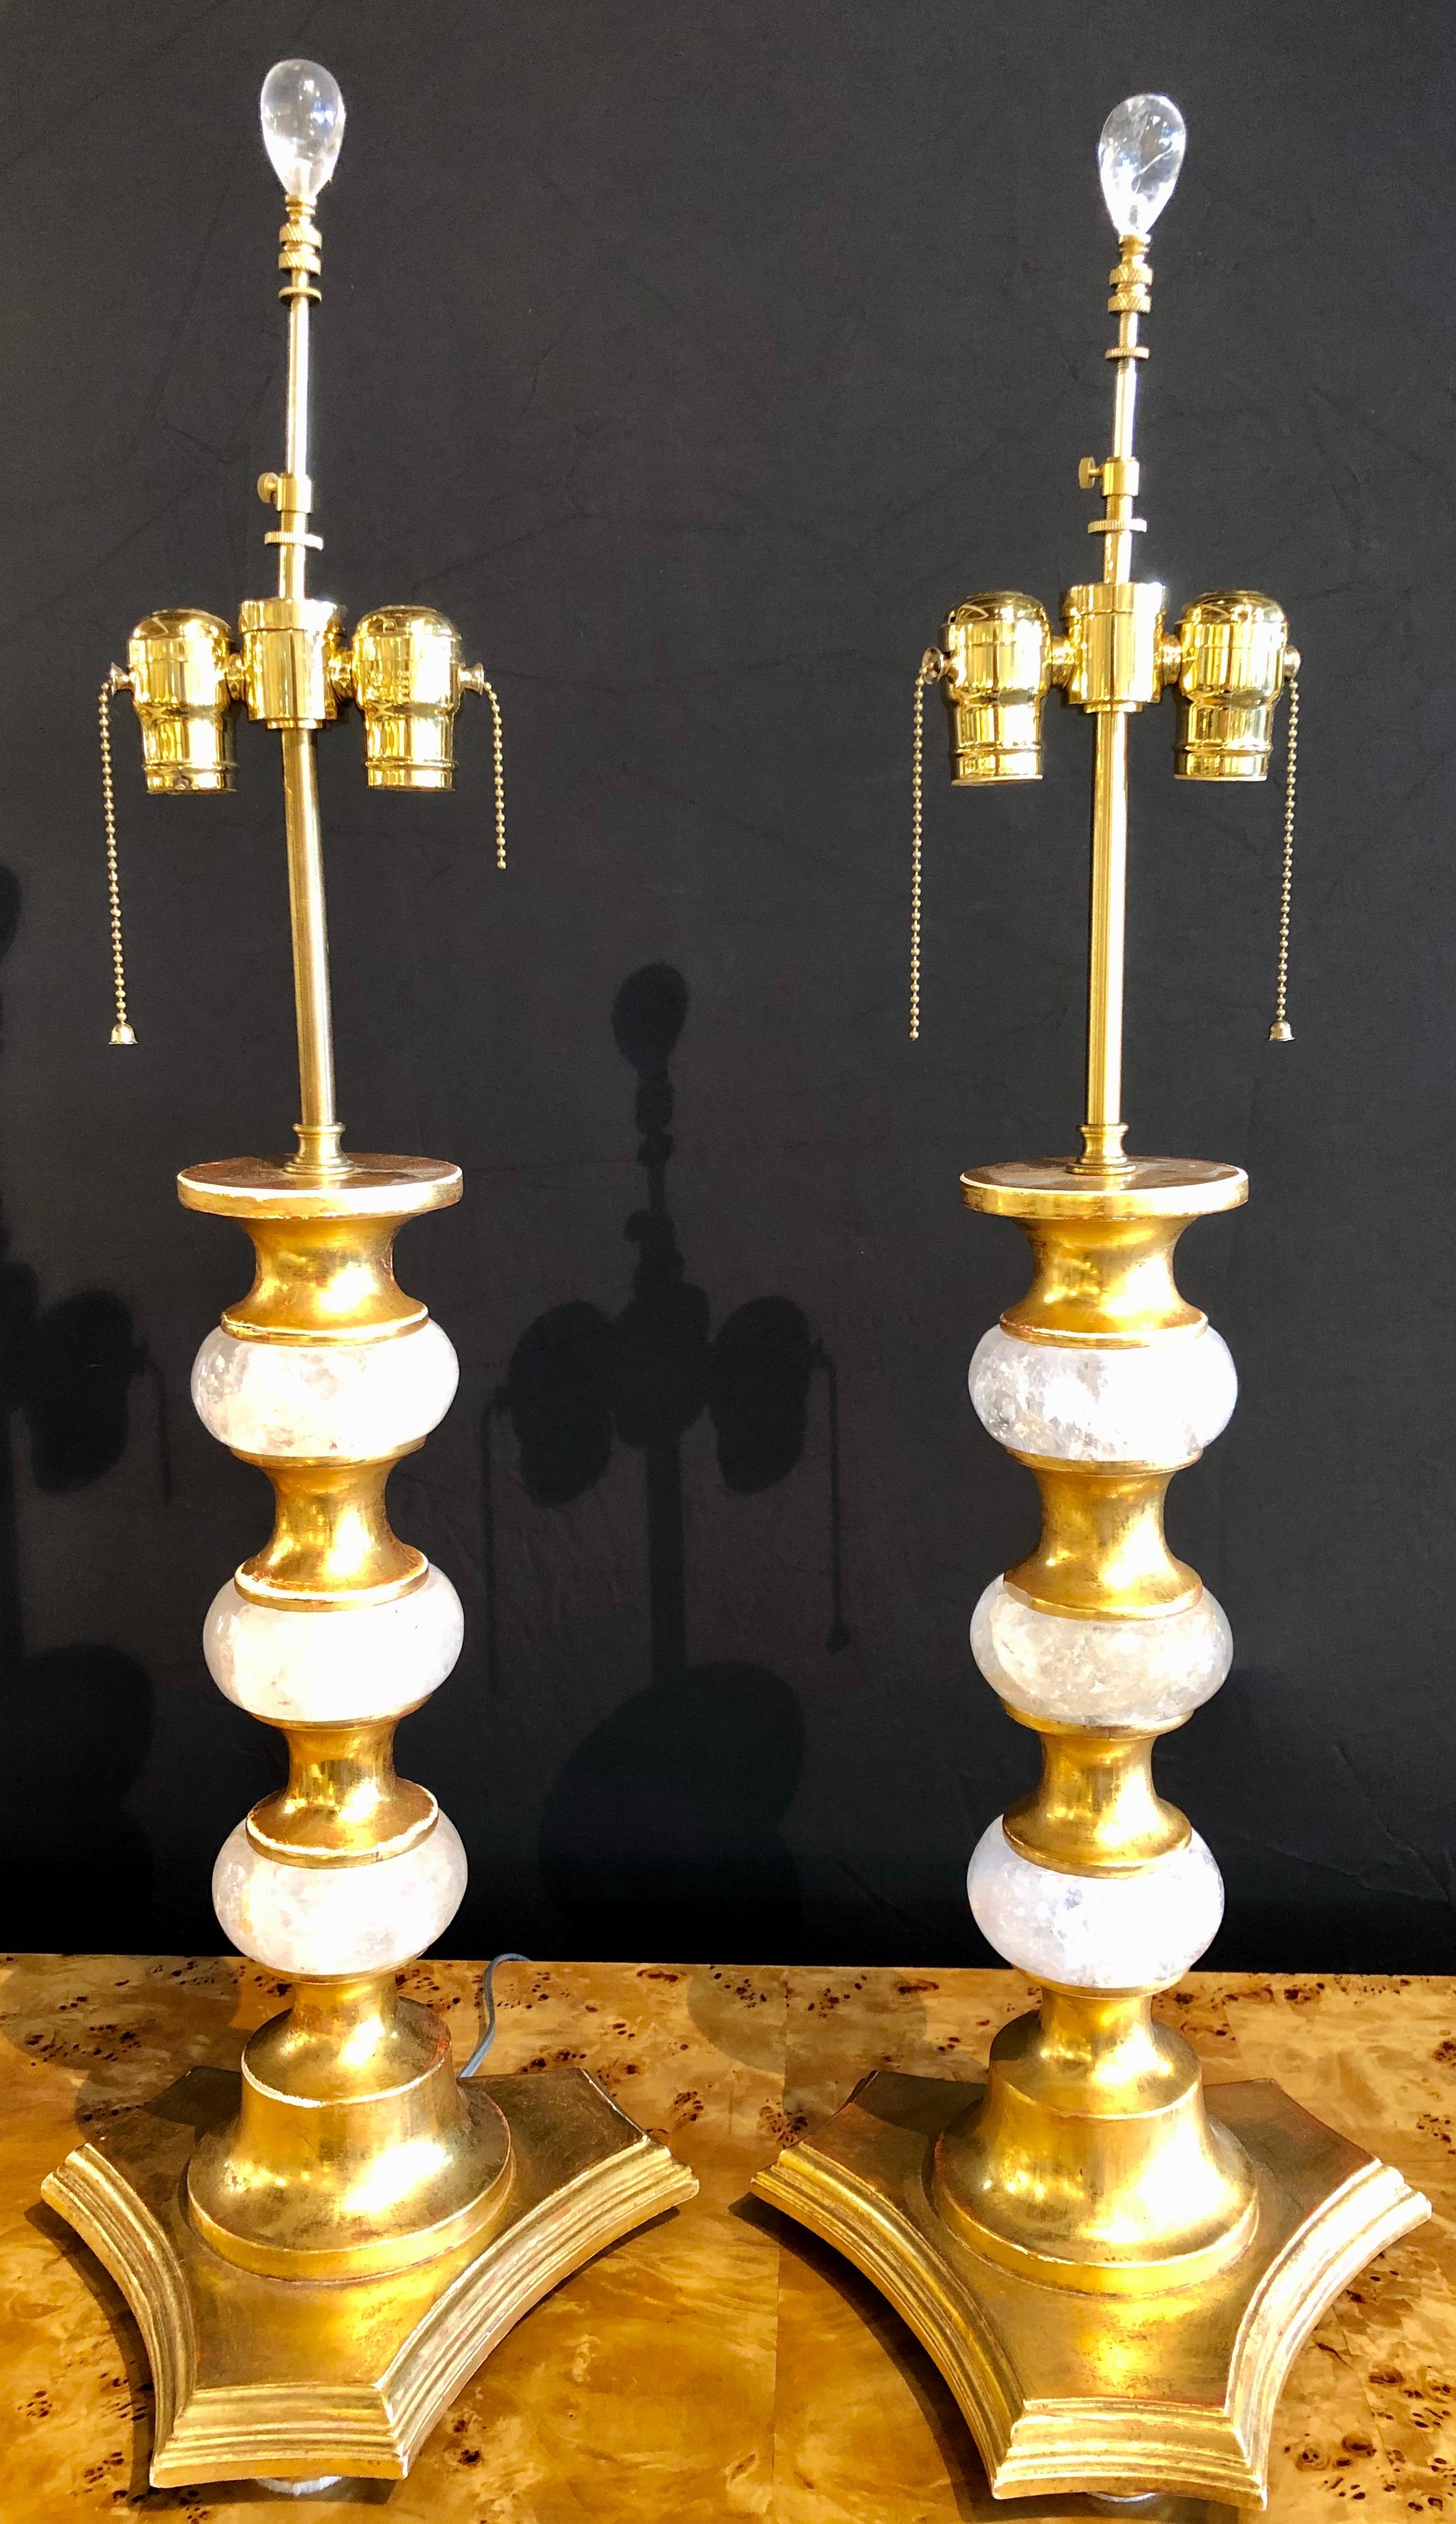 Pair of Art Deco style rock crystal table lamps. The fine oval round crystals separated by gilt wood supports. The pair with a set of rock crystal finials. Lamps do not come with shades. Newly wired.
PXX.